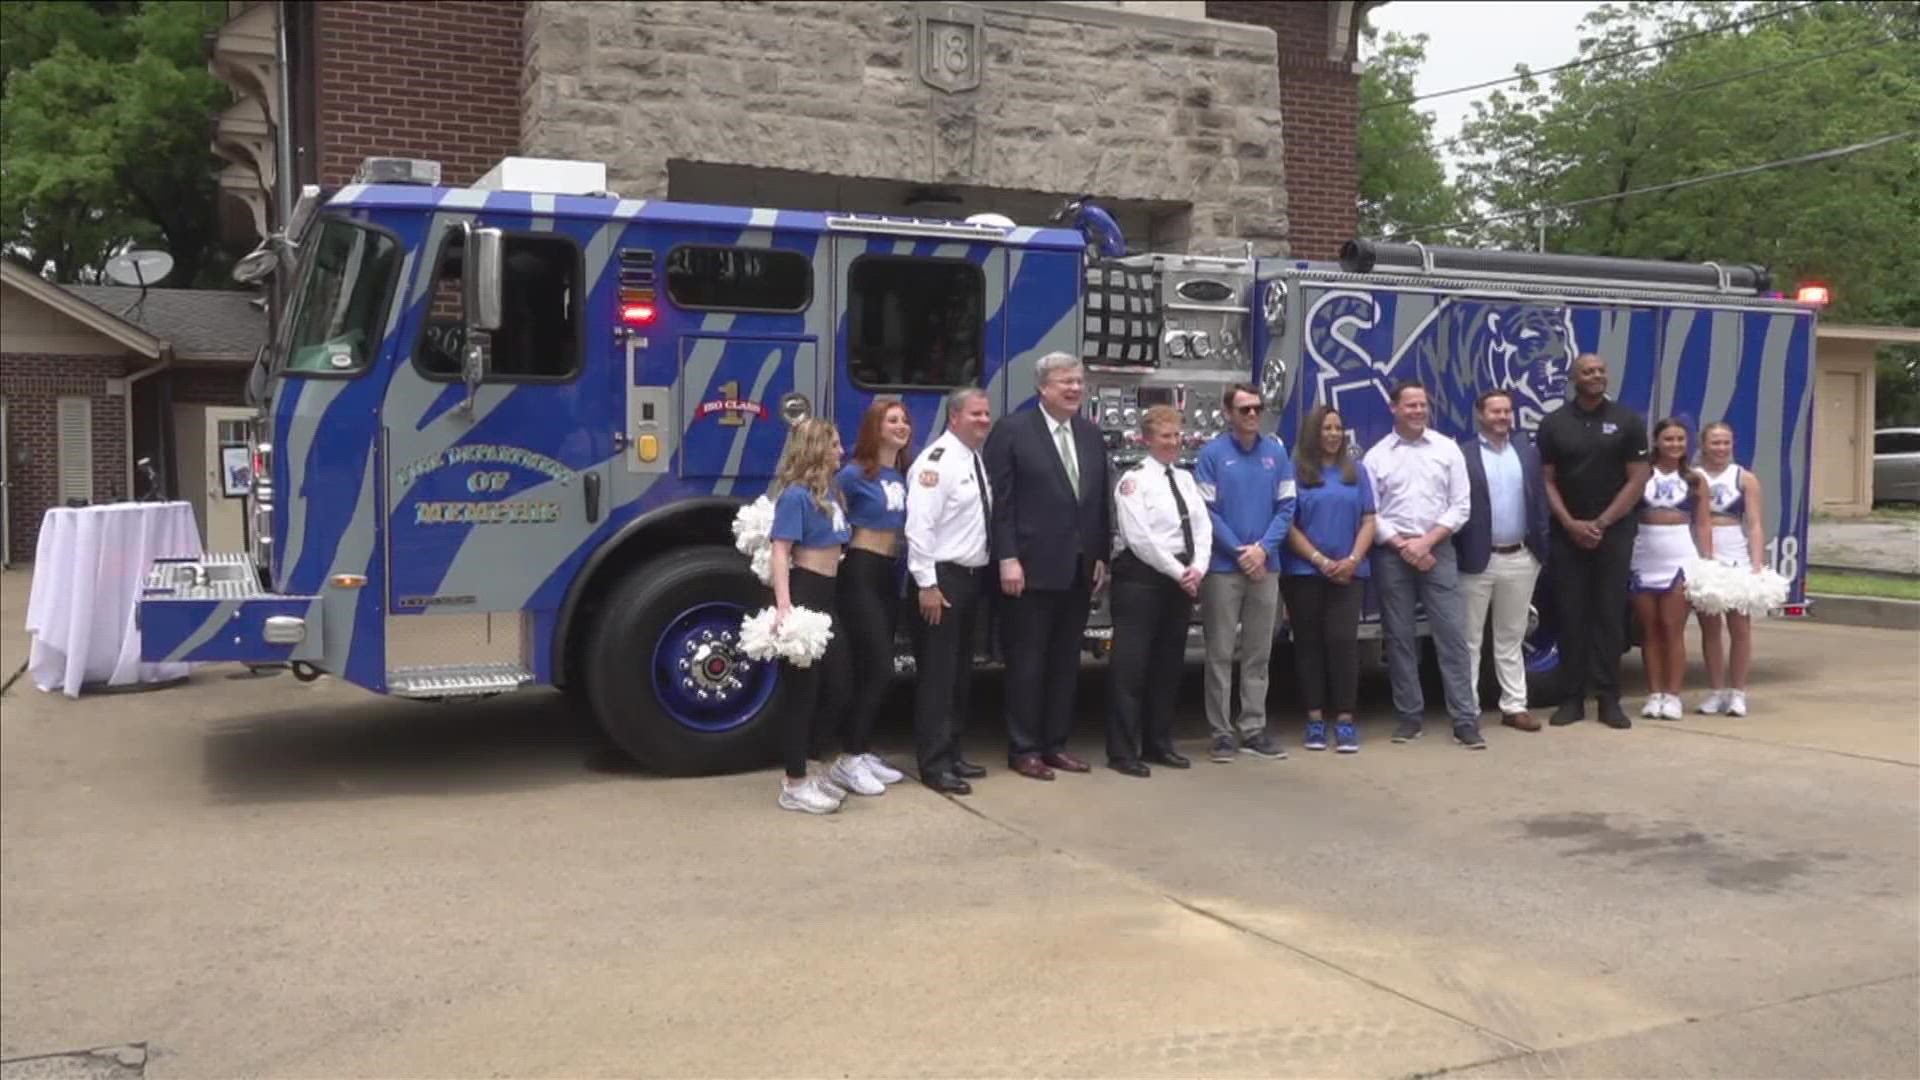 Monday, Mayor Jim Strickland, Memphis Tigers head basketball coach Penny Hardaway, and Fire Chief Gina Davis helped to unveil a special new truck hitting the Memphis